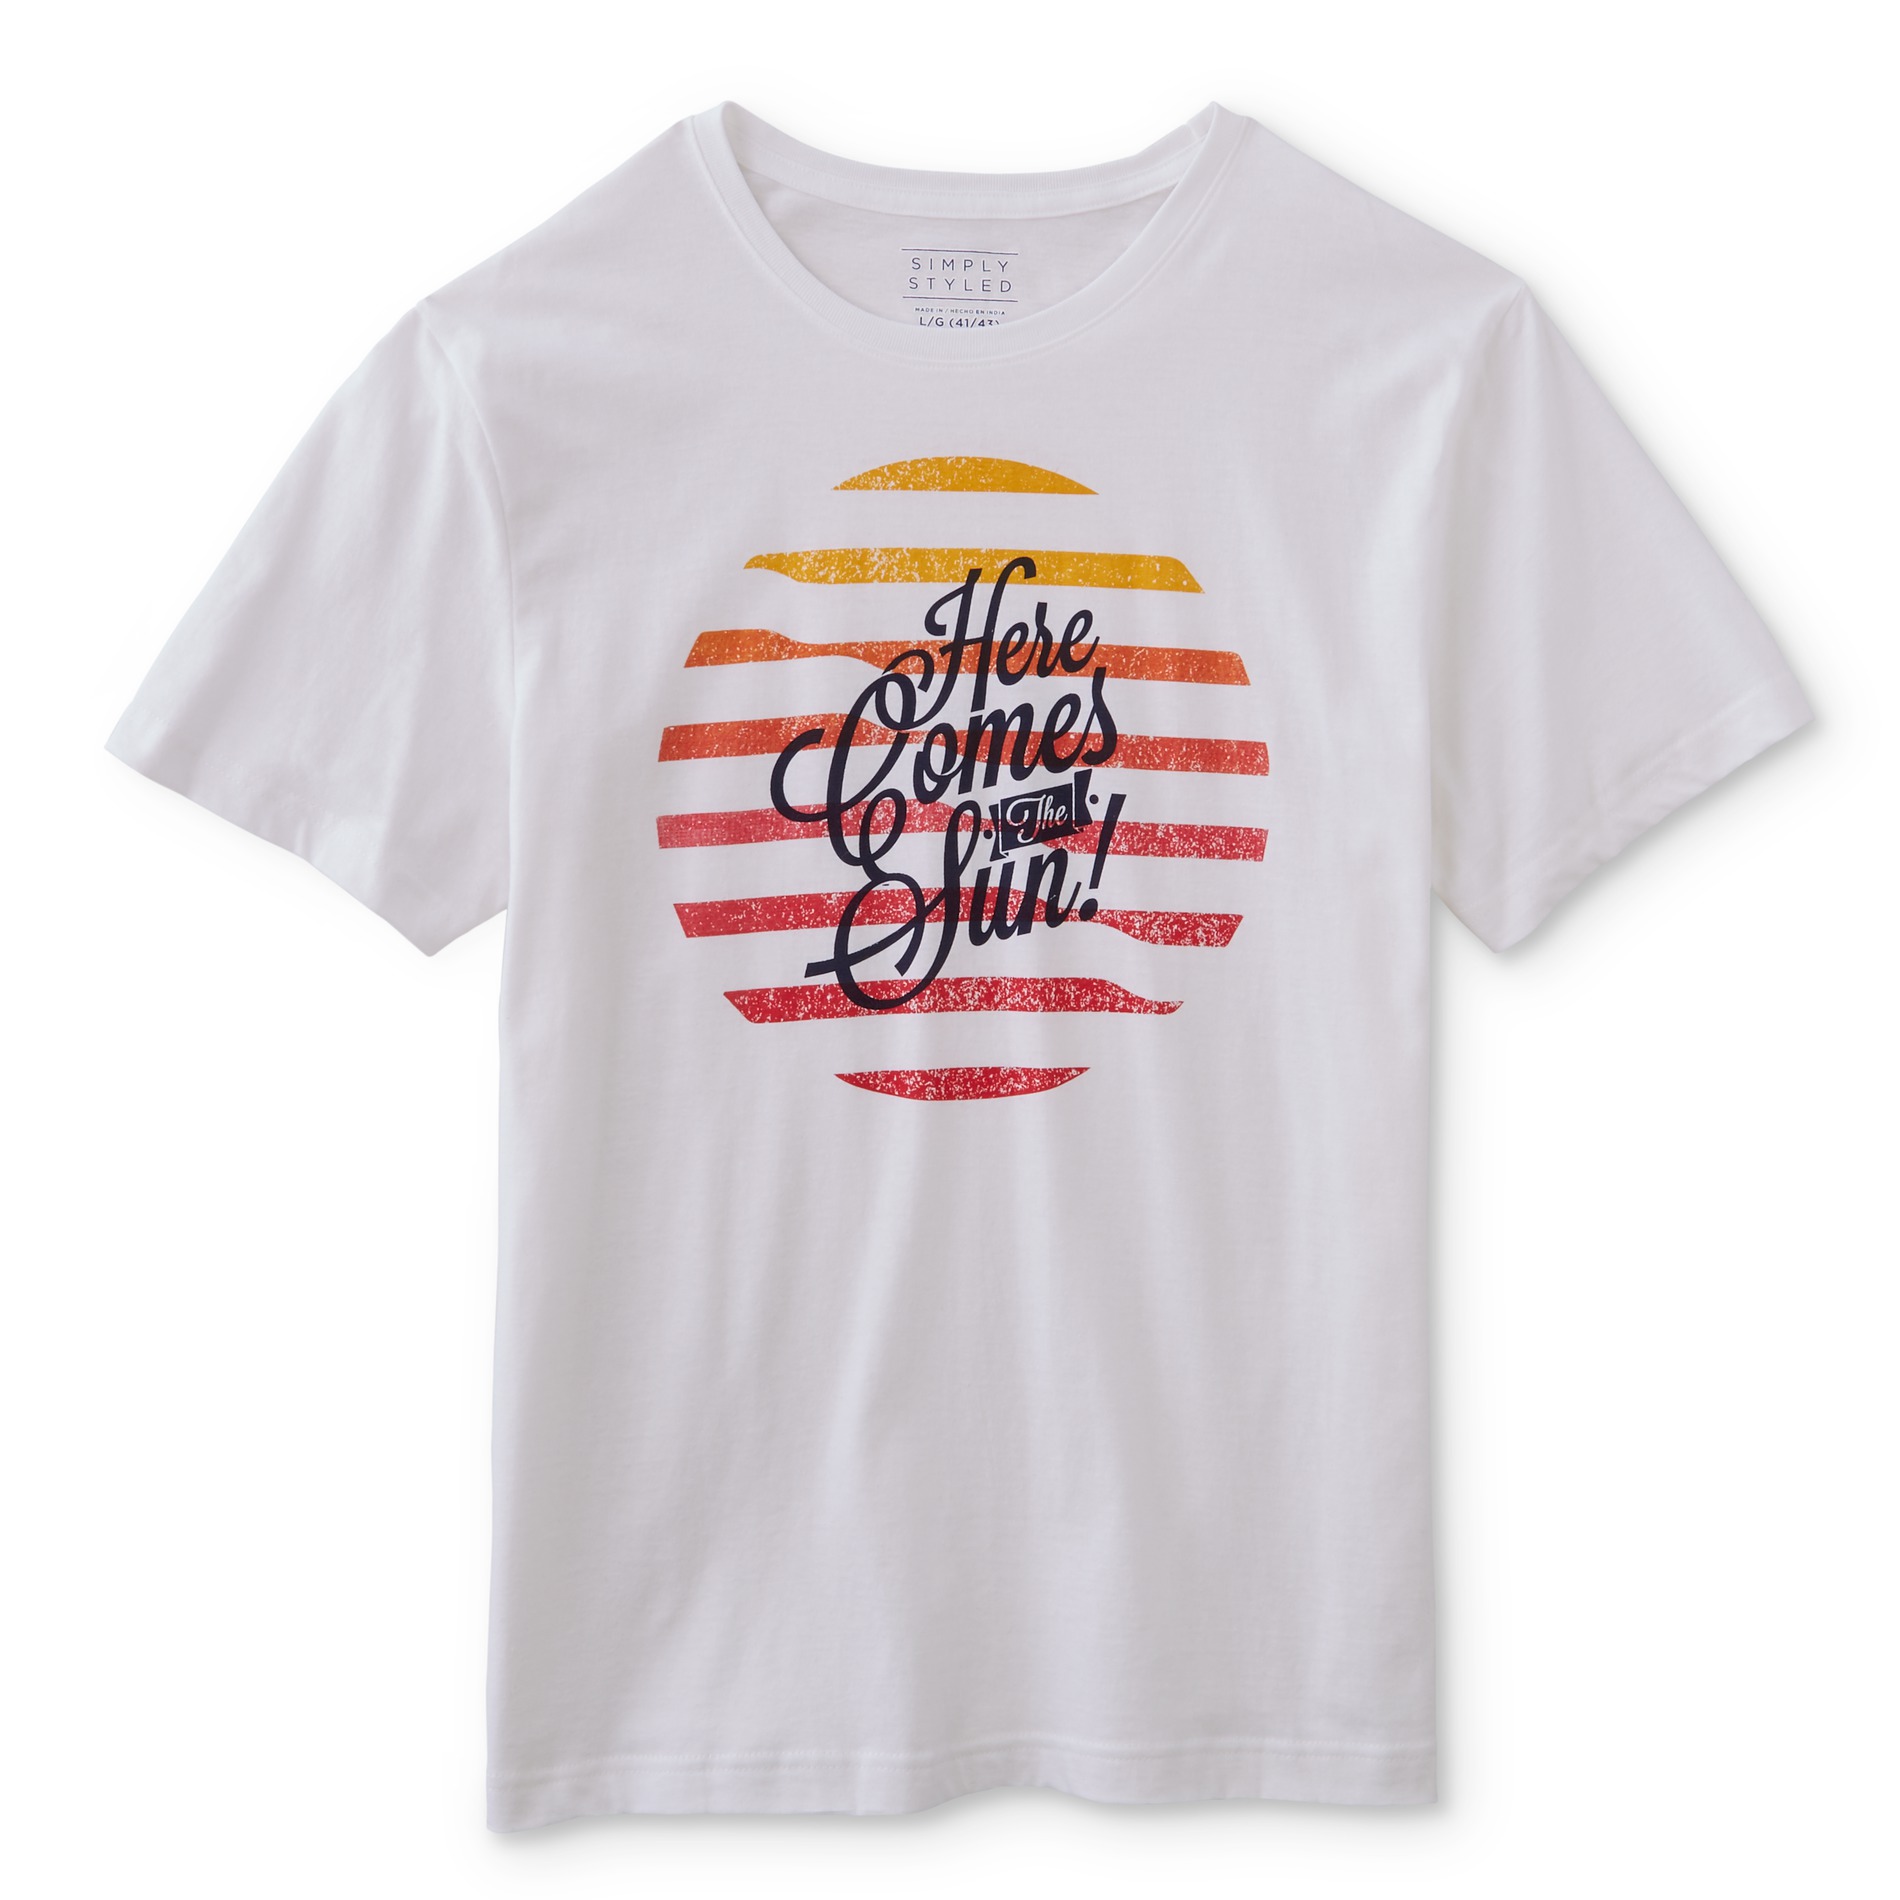 Simply Styled Men's Graphic T-Shirt-Here Comes the Sun